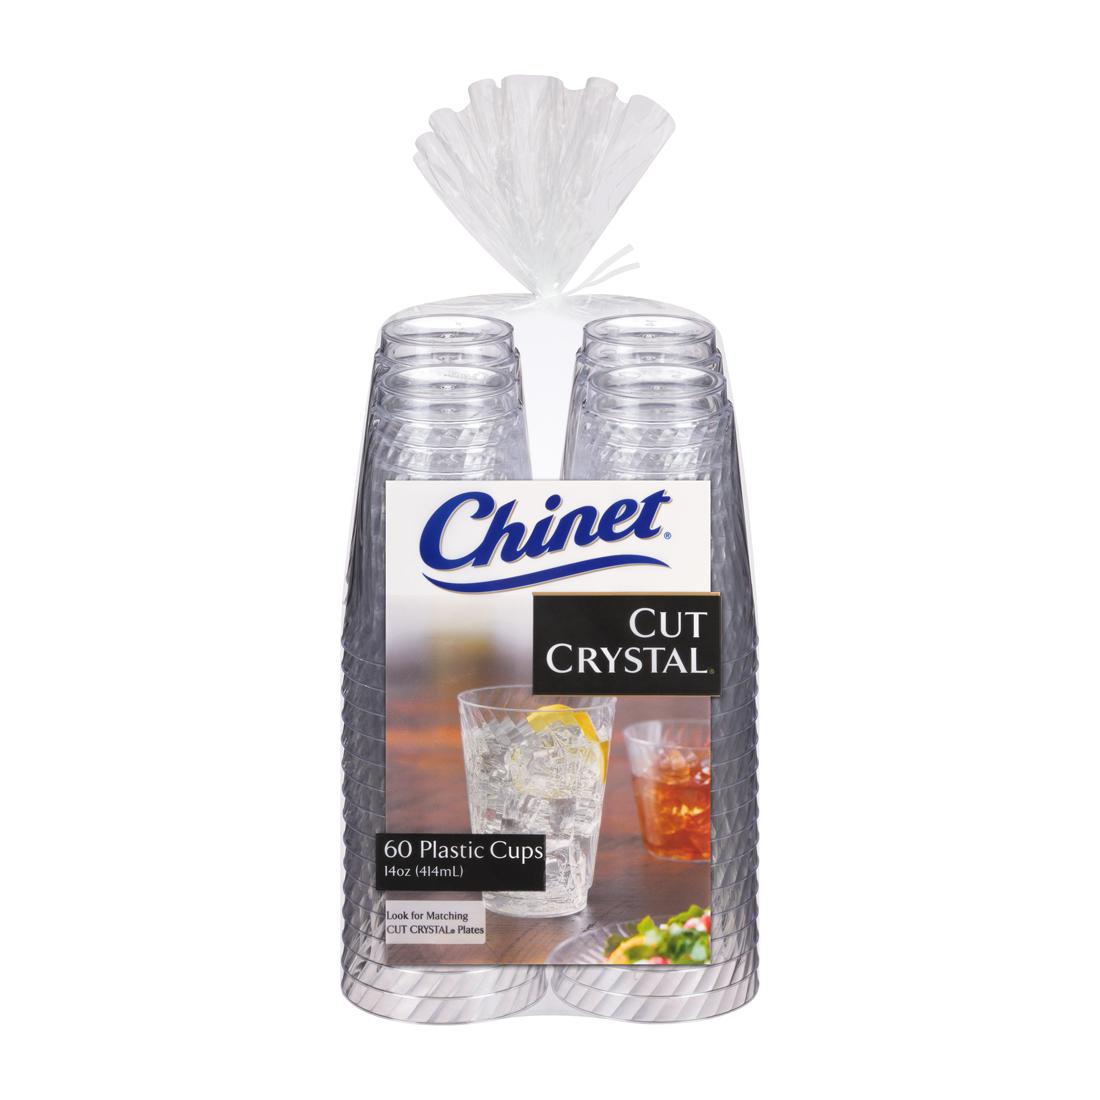 Chinet 14-Oz. Crystal Cups, 60 ct. - Clear